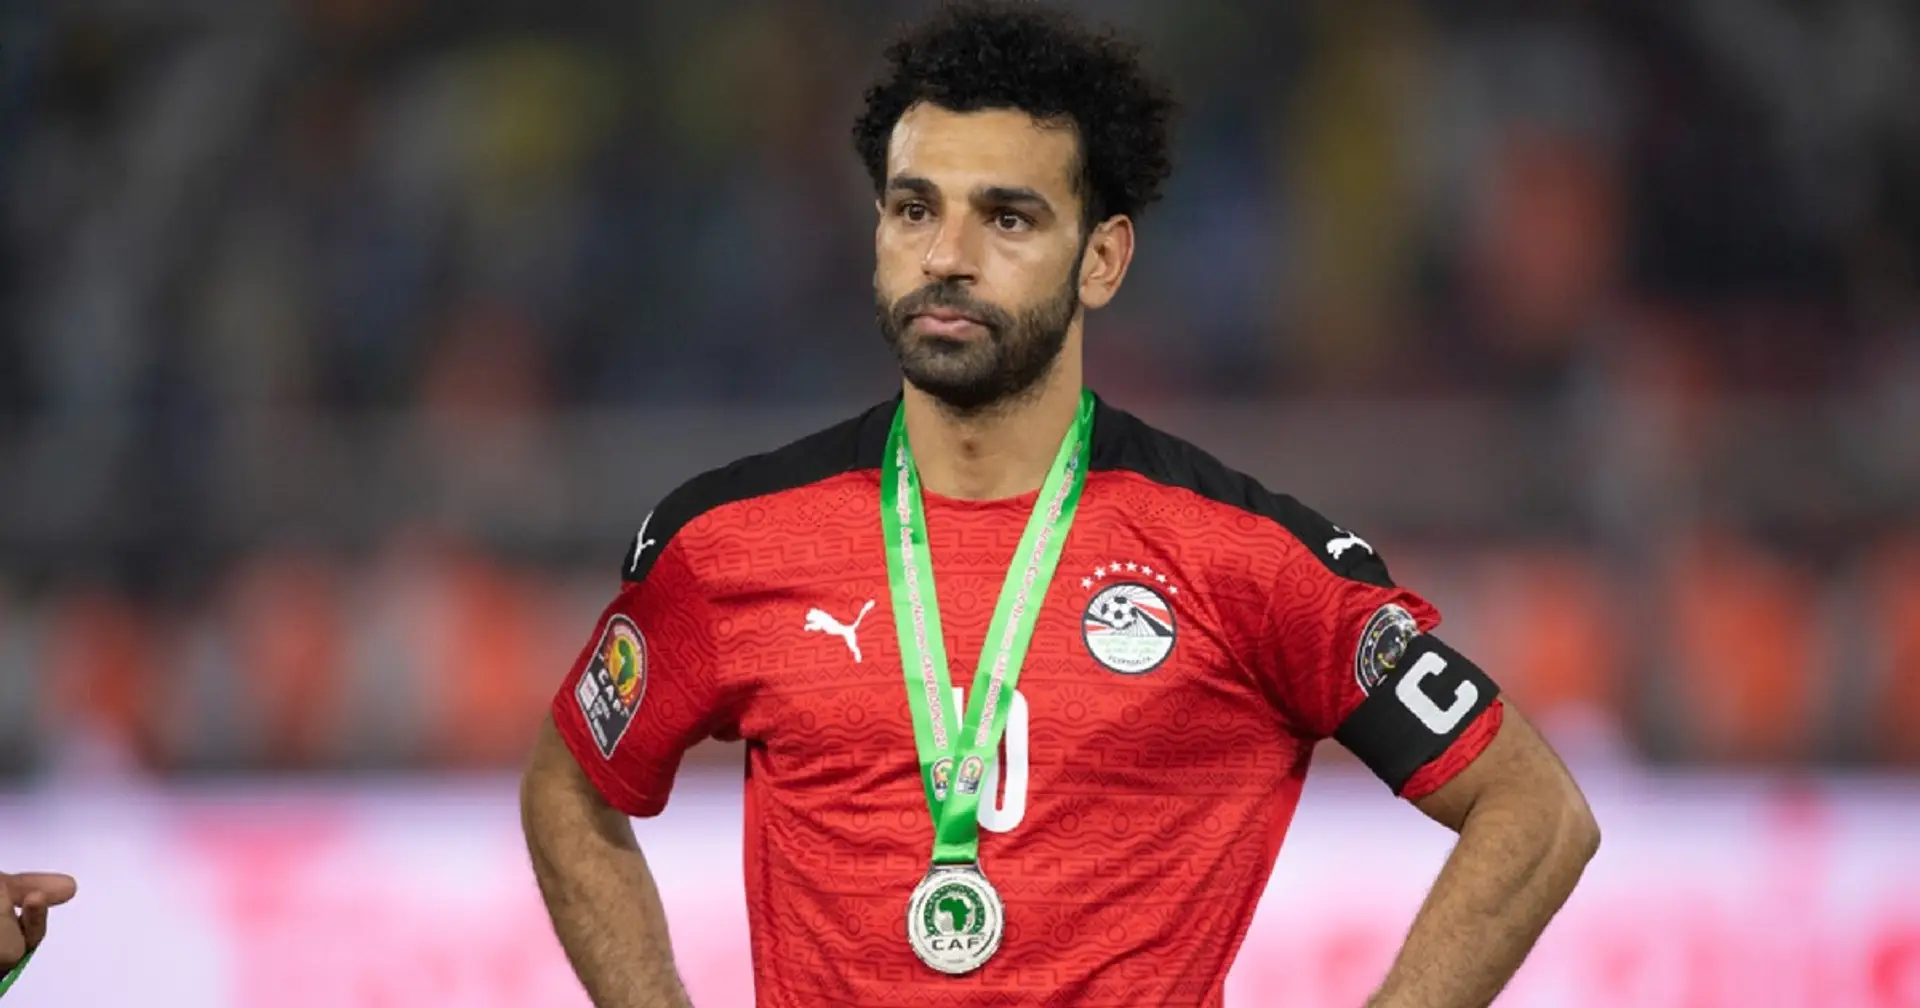 How many Liverpool games could Salah potentially miss next season due to AFCON? Answered